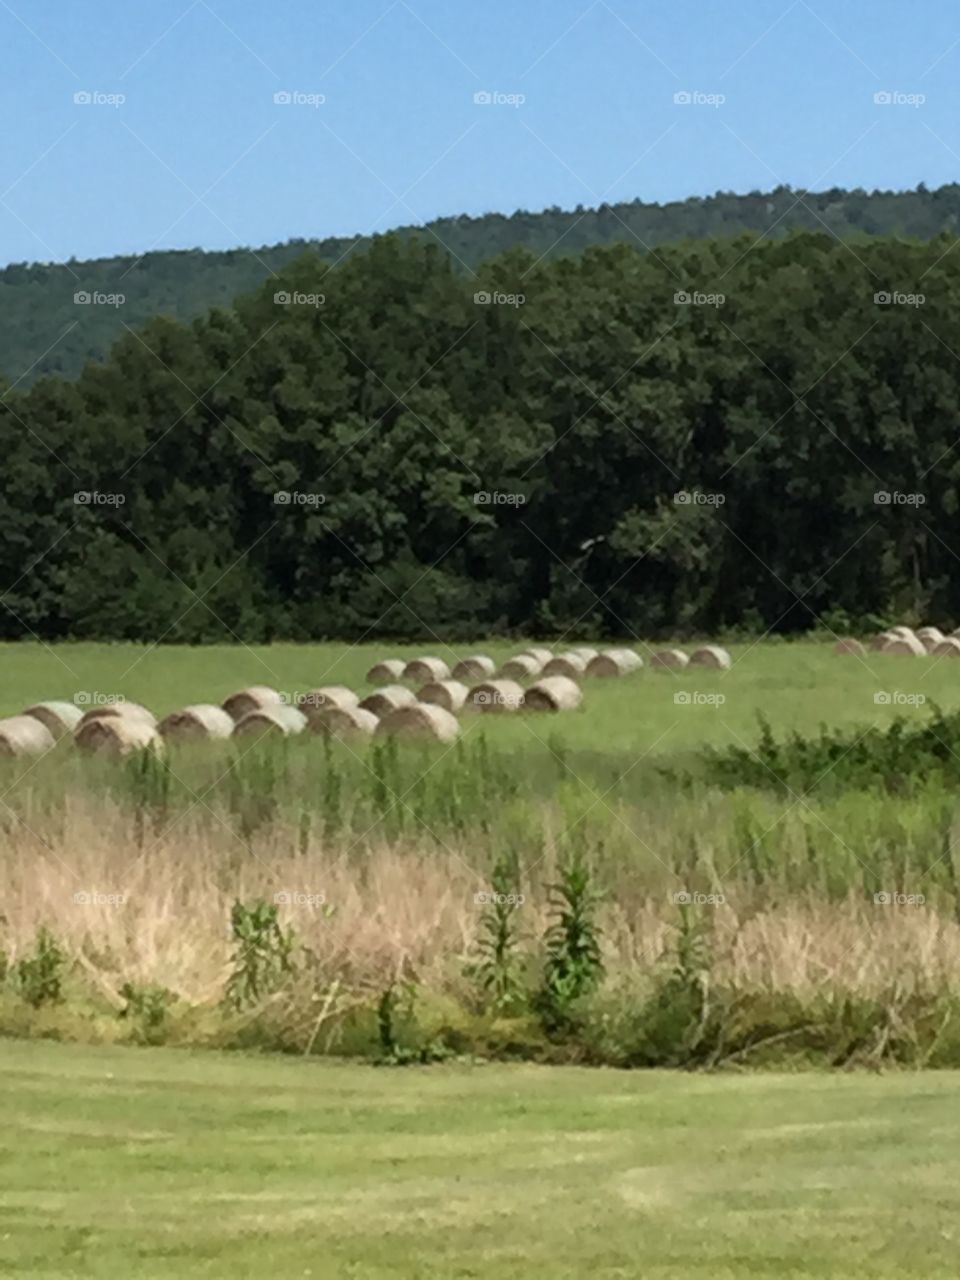 Chamberlyne Field. Late summer bales of hay sitting in a remote pasture 